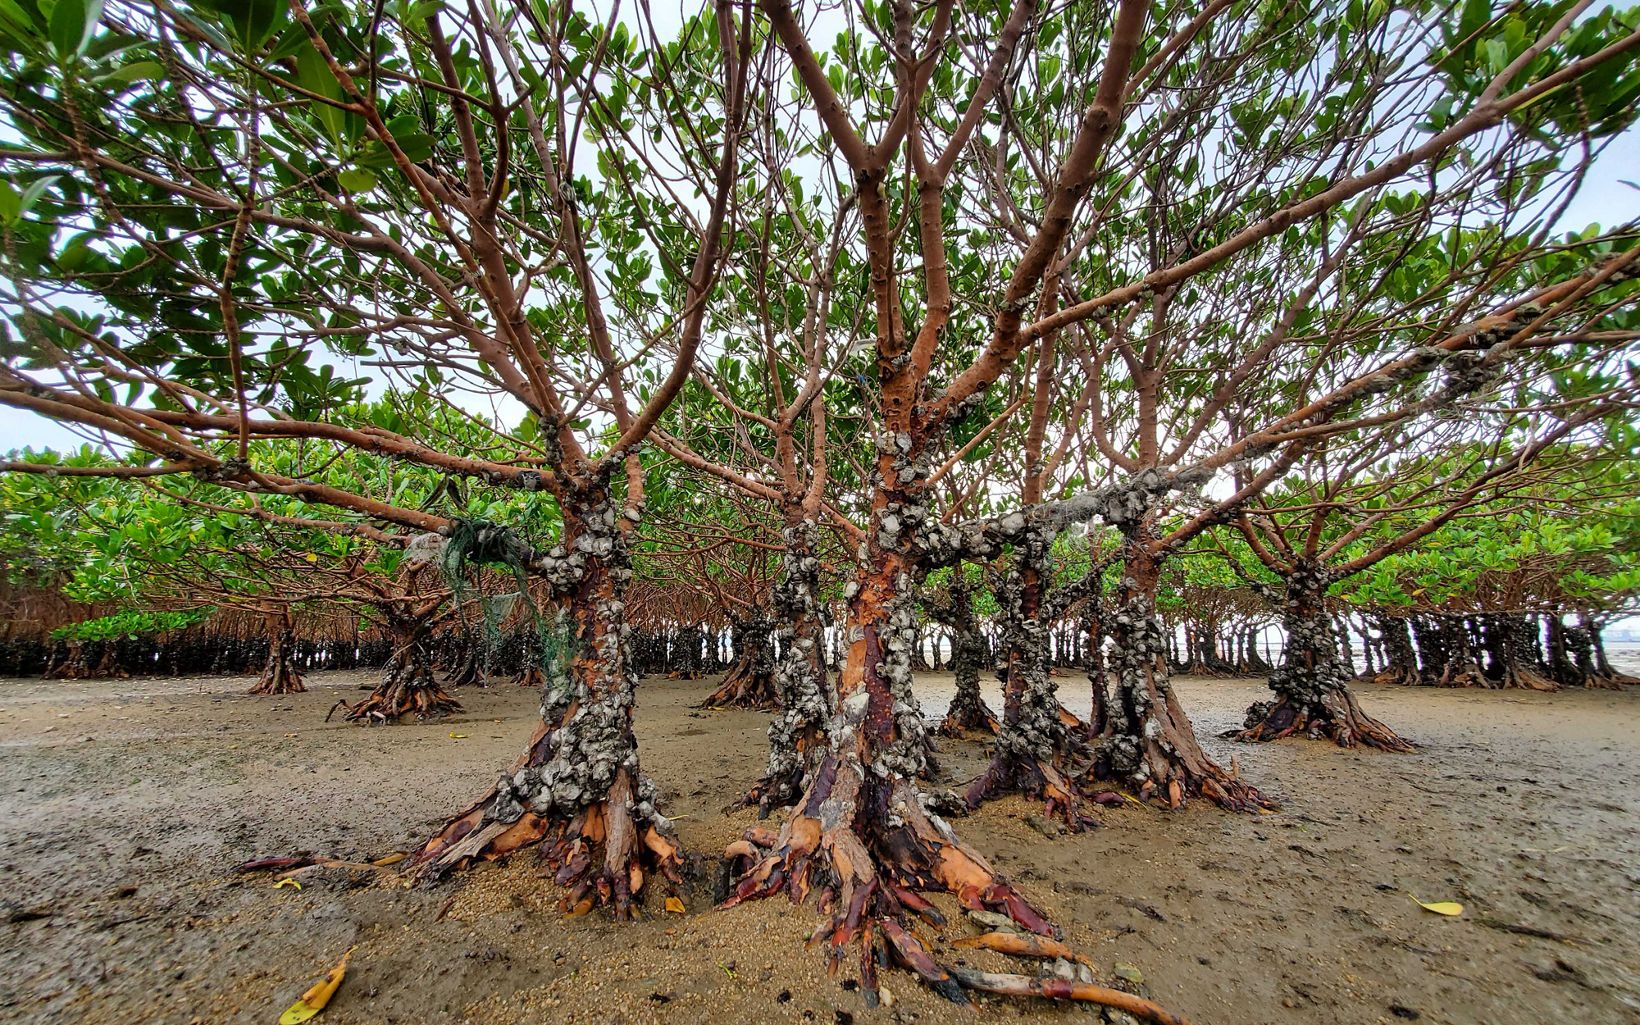 Mangroves are part of the varied habitats that can be found on the mudflats of Pak Nai. © Lori Cheung/TNC